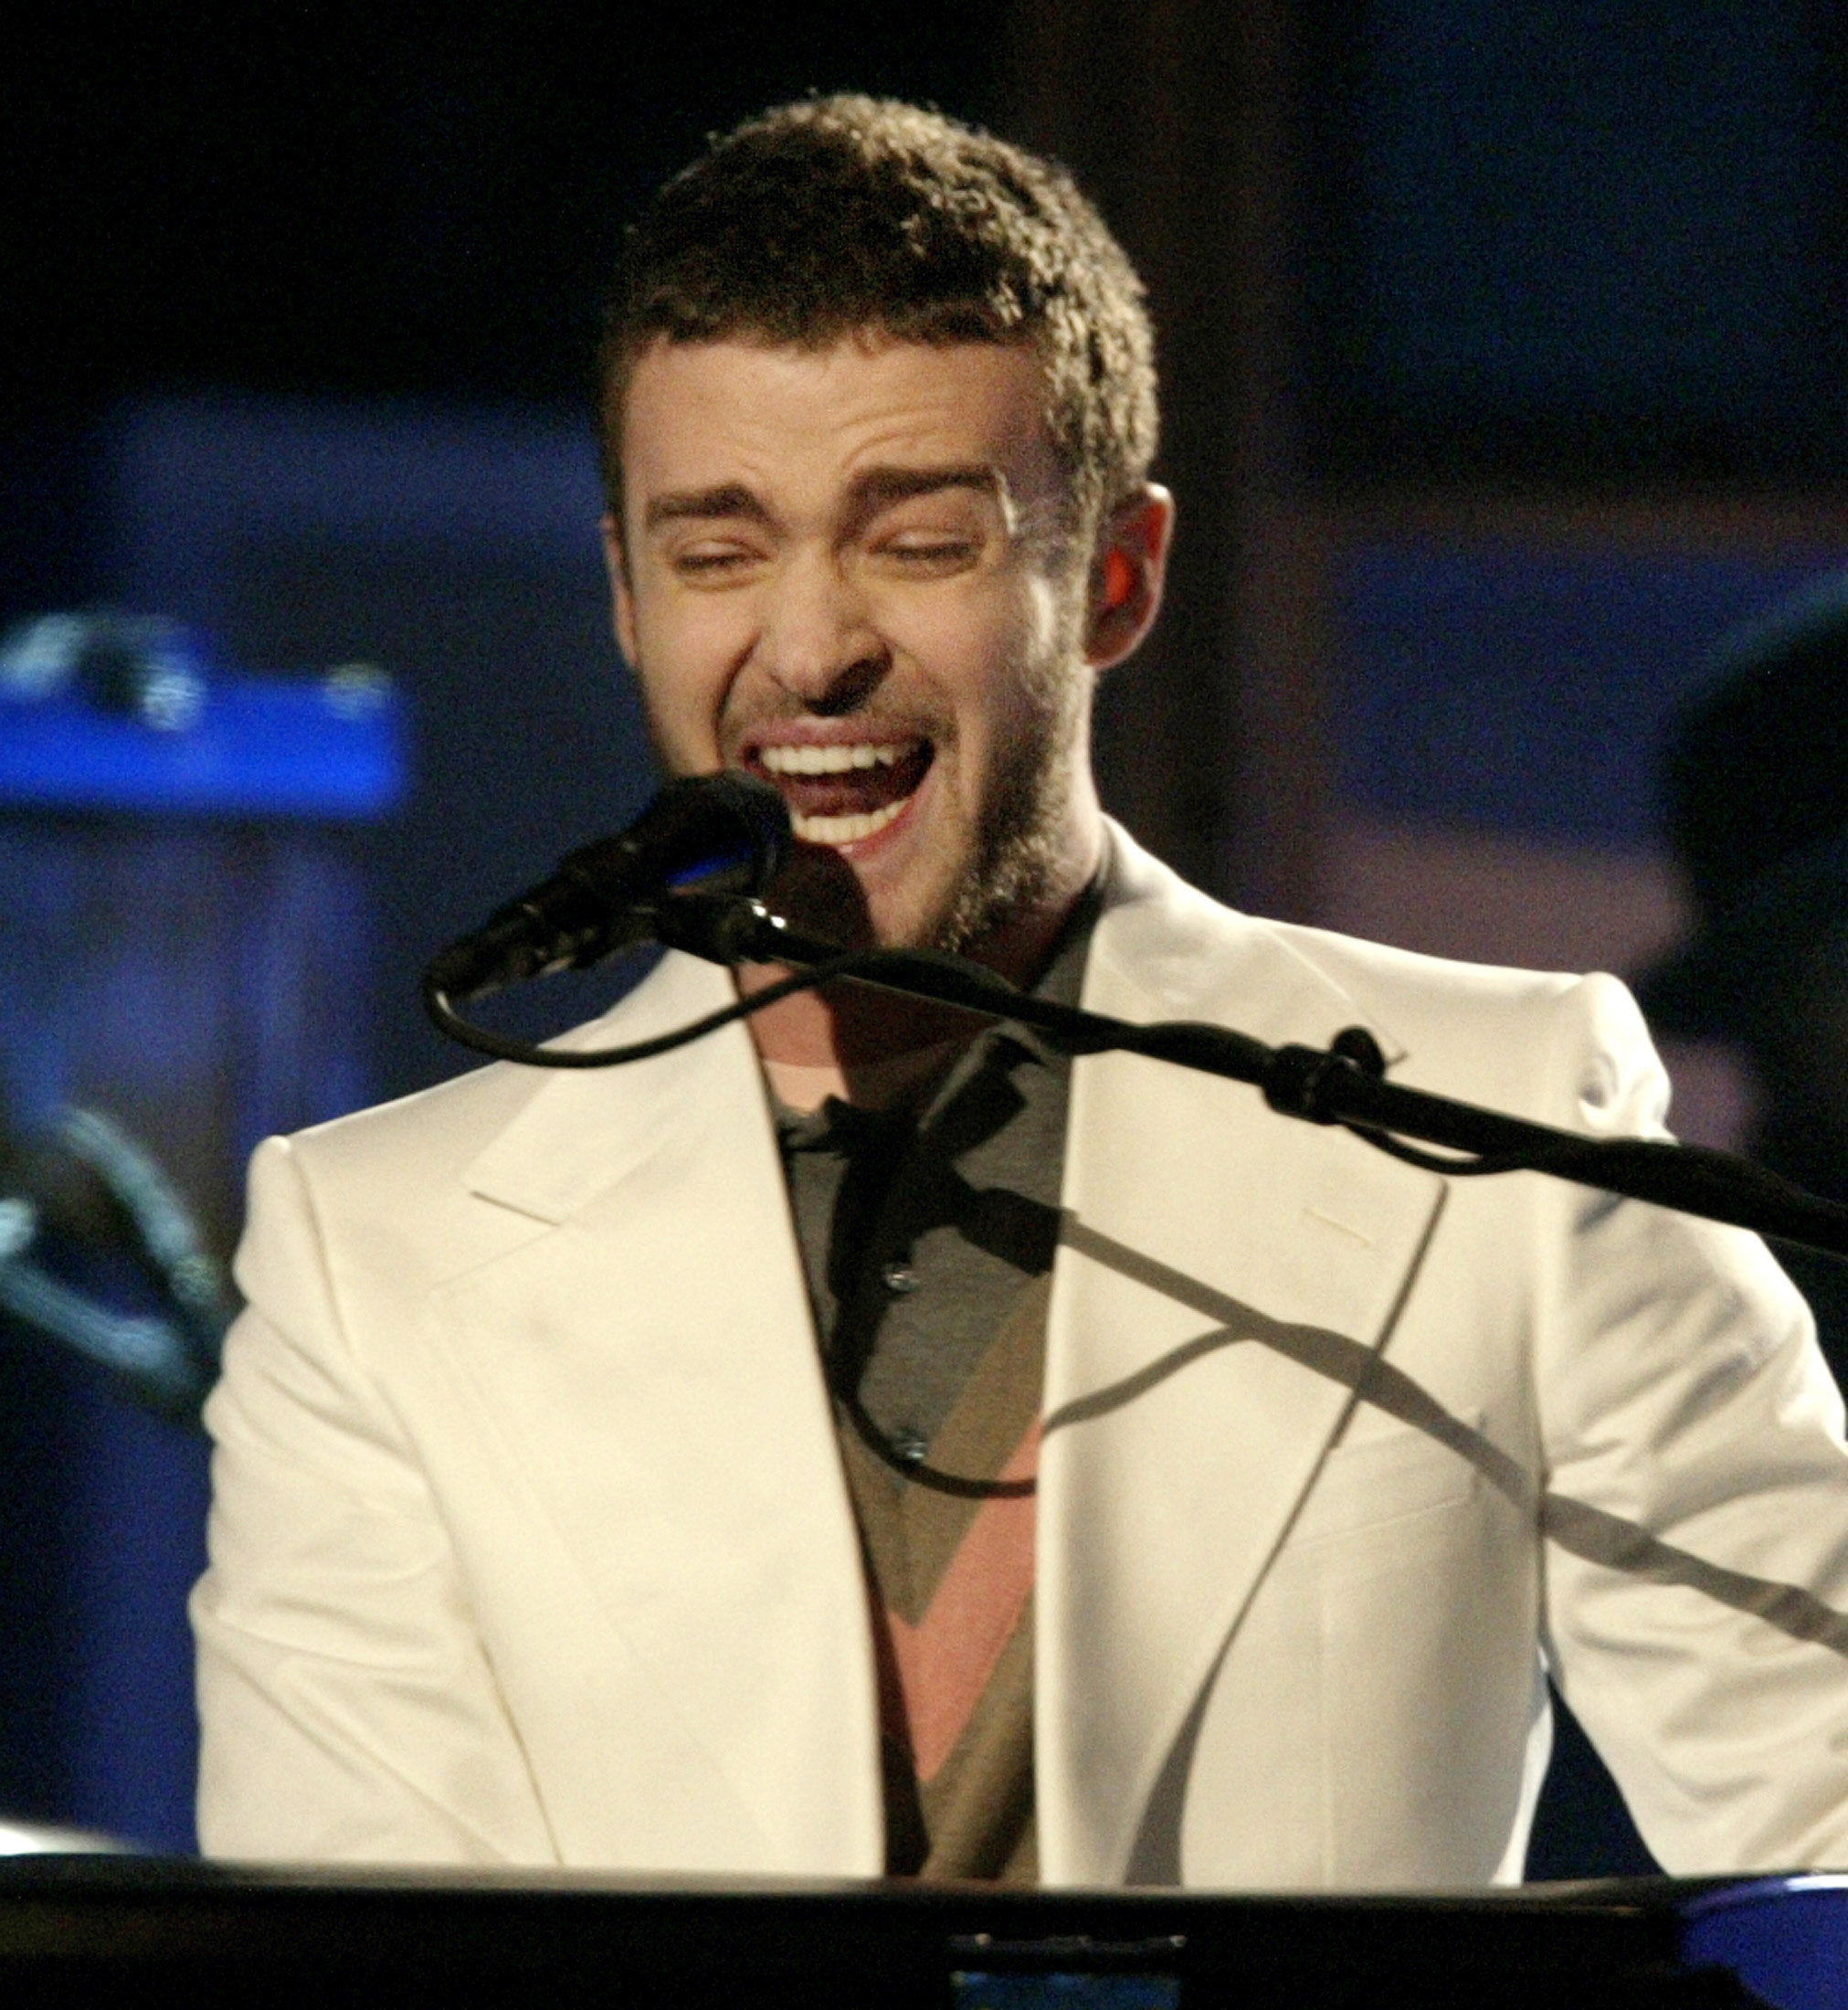 Singer Justin Timberlake performs during the 46th annual Grammy Awards in Los Angeles February 8, 2004. REUTERS/Gary Hershorn GMH